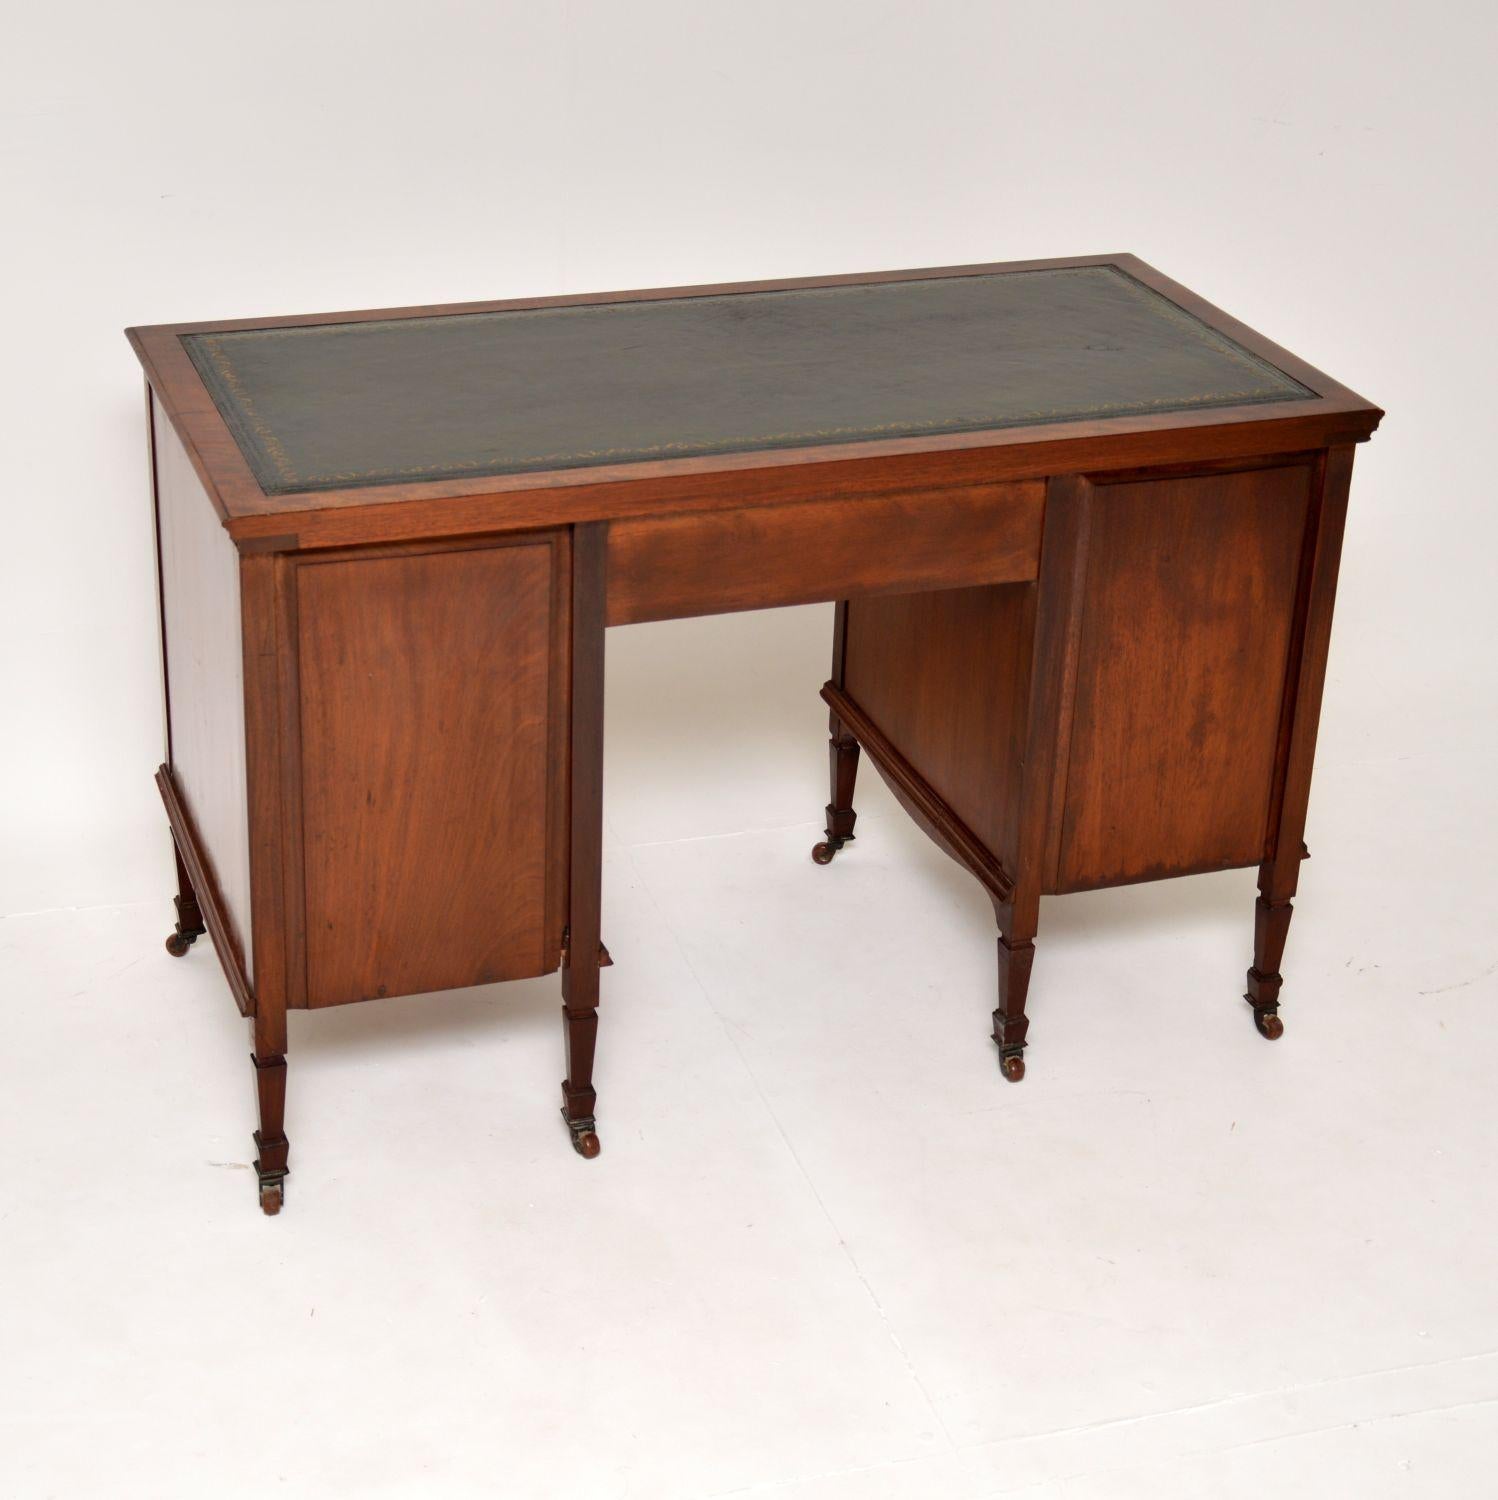 19th Century Antique Victorian Leather Top Desk For Sale